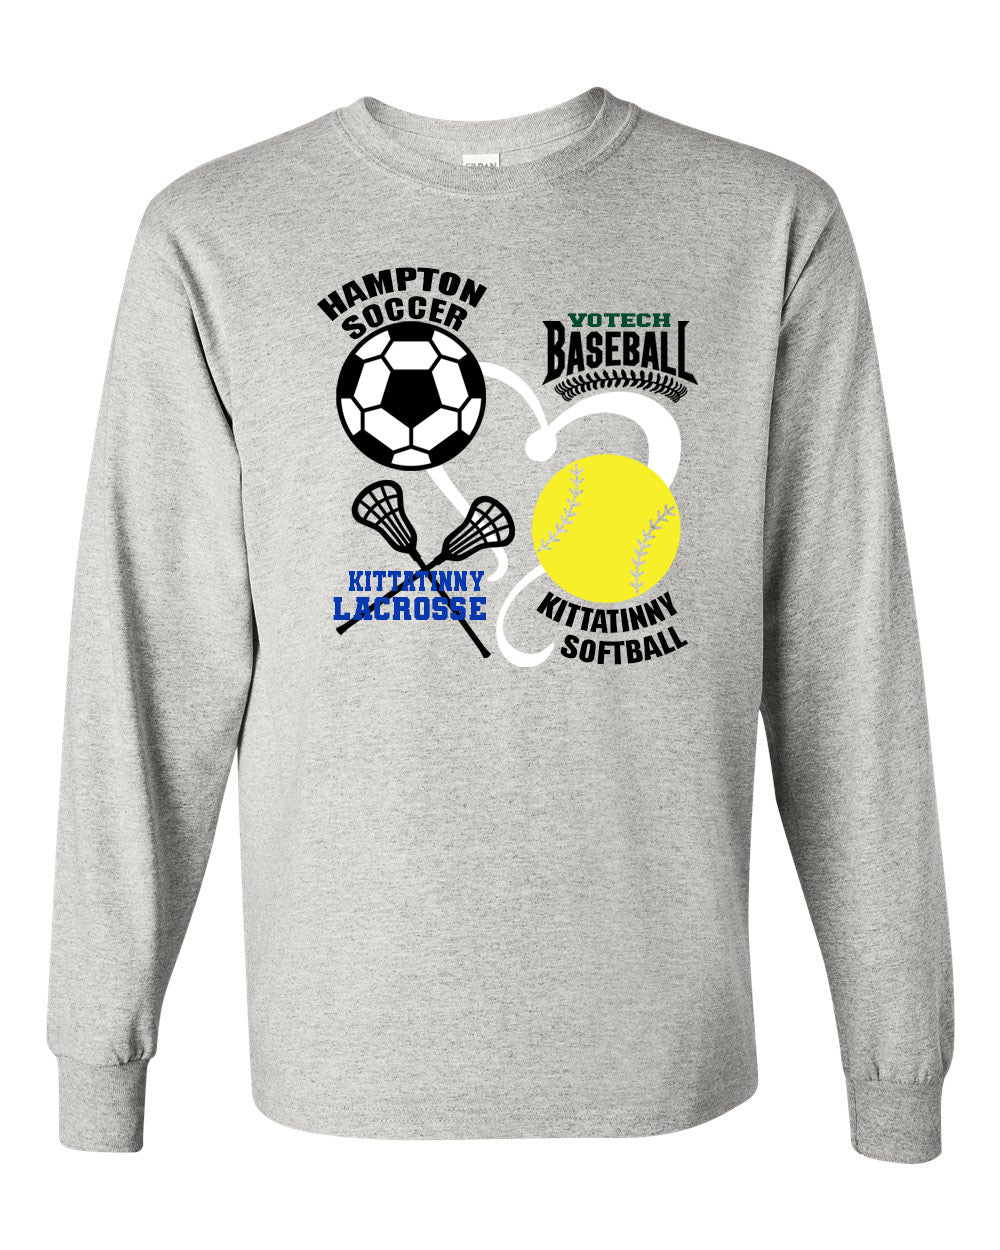 Kids in all sports Long Sleeve Shirt